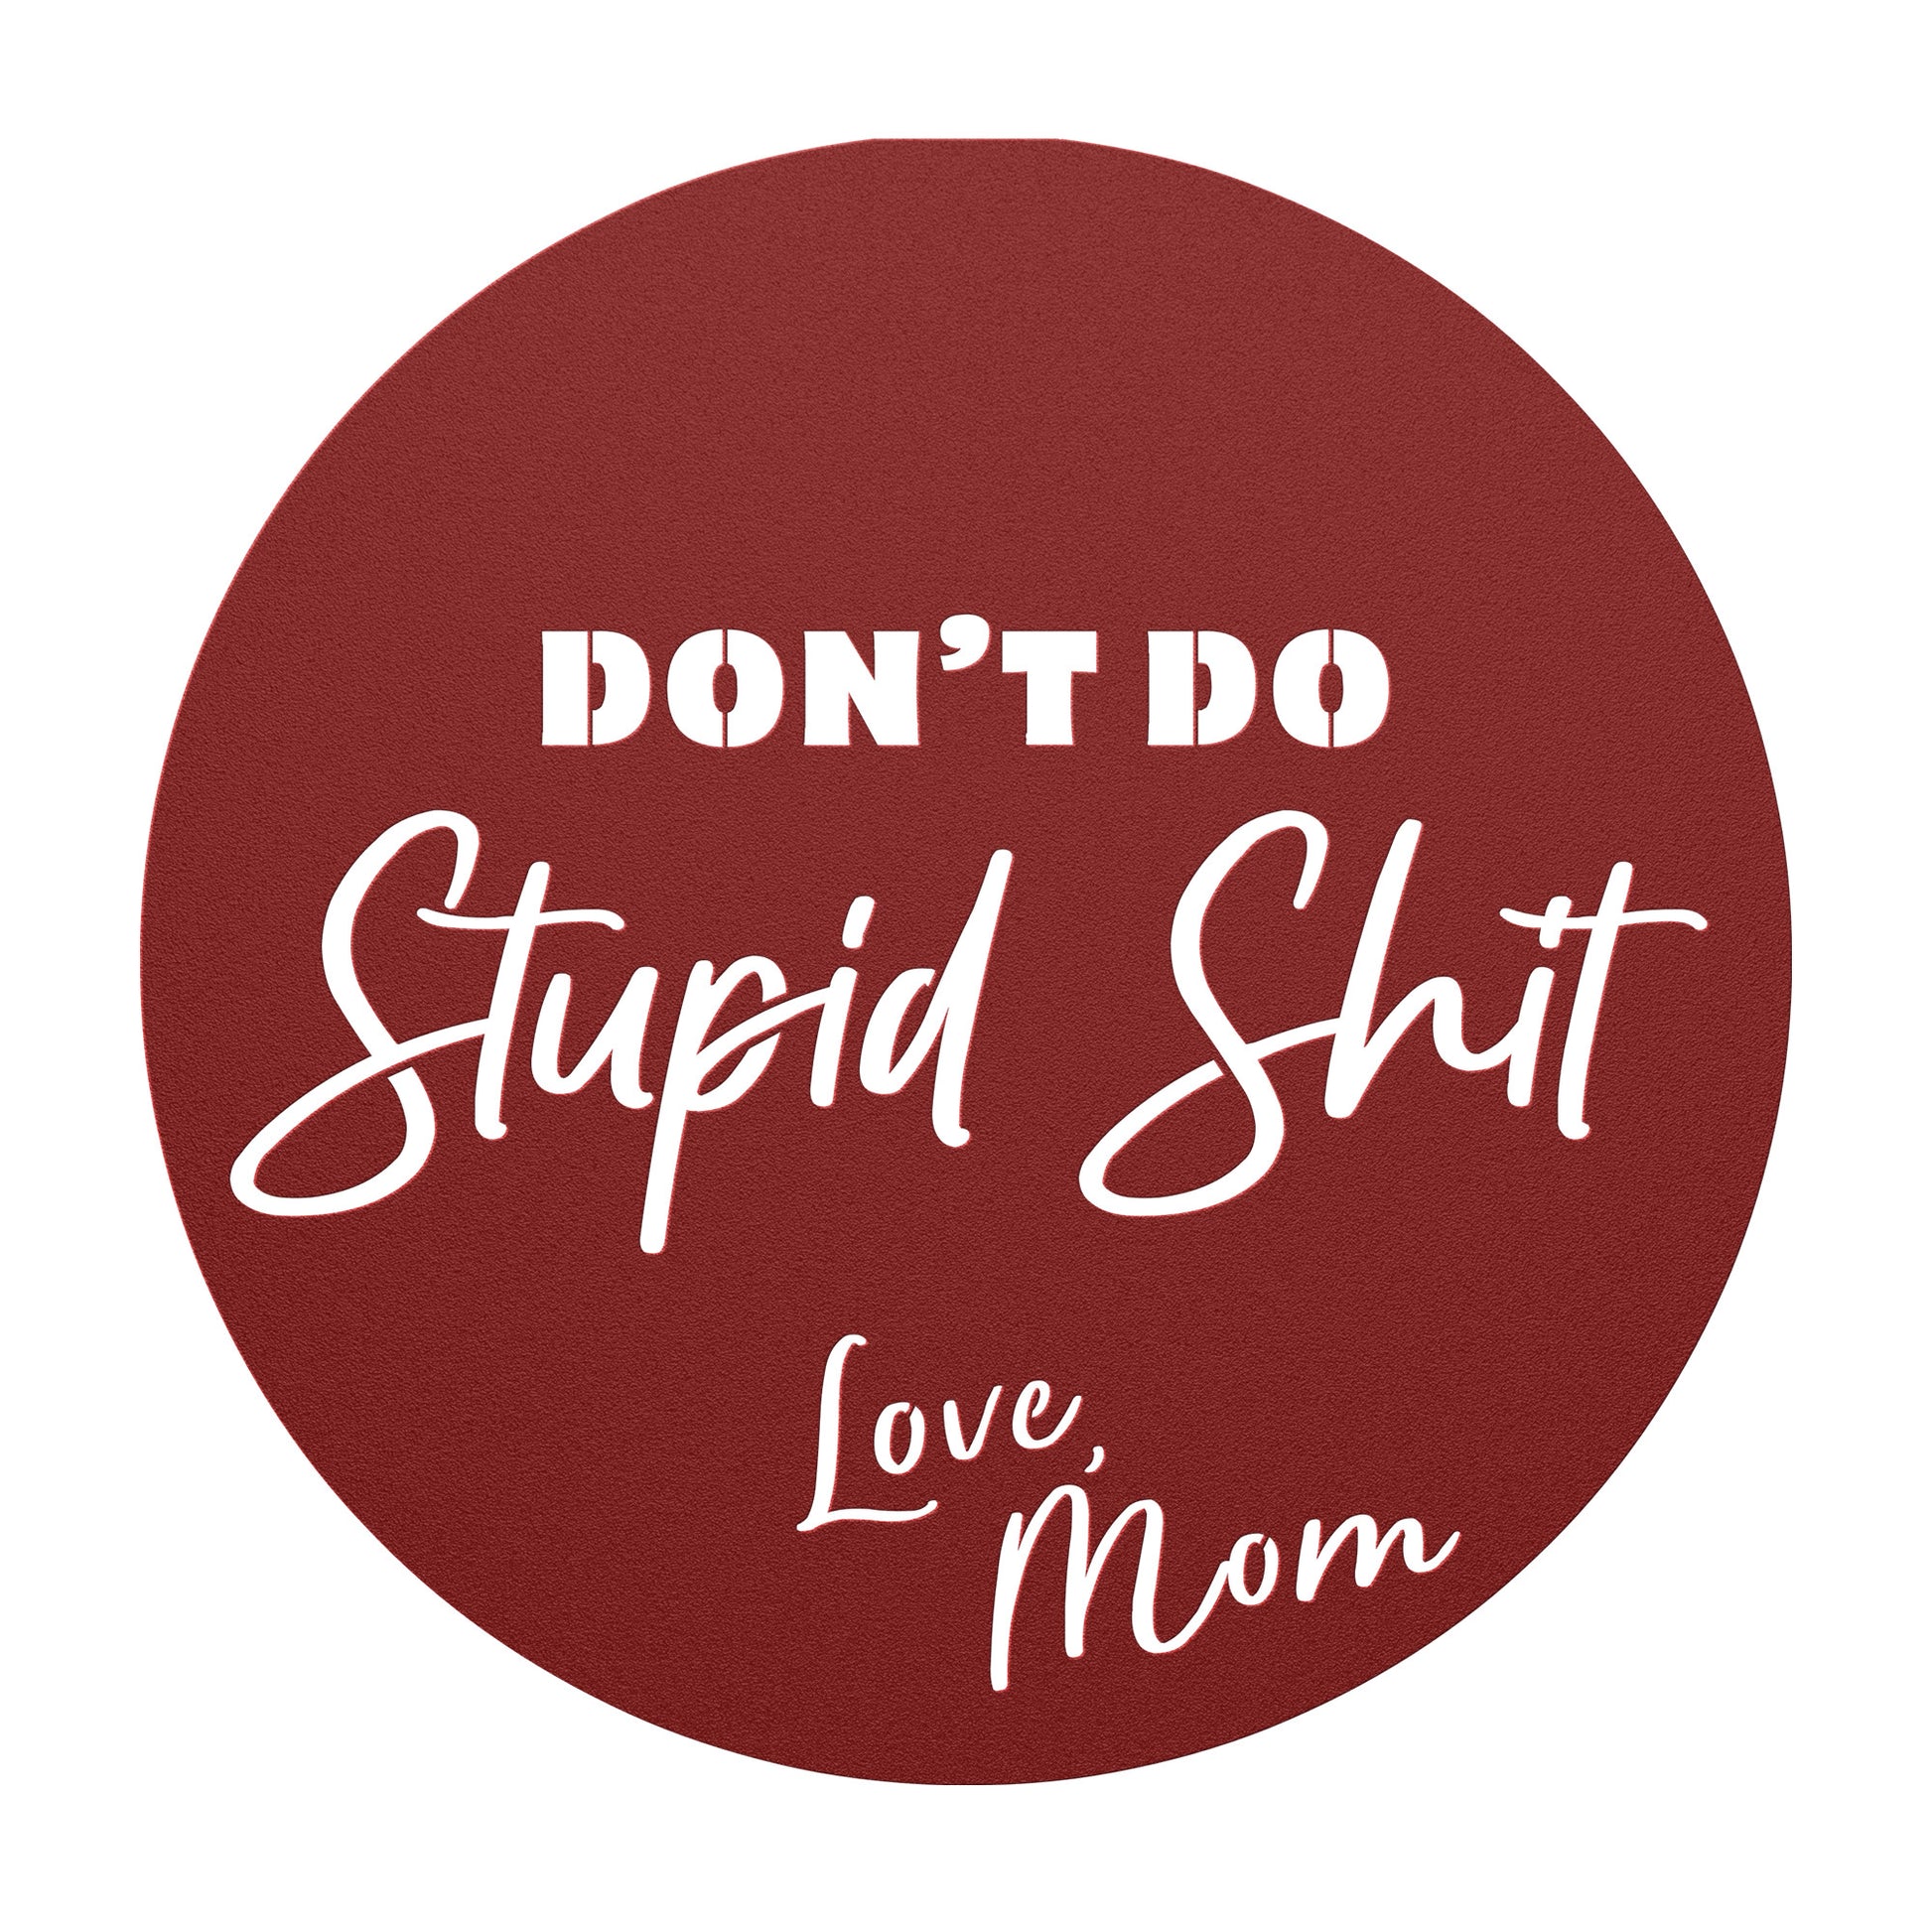 Don't do stupid shit love mom - red